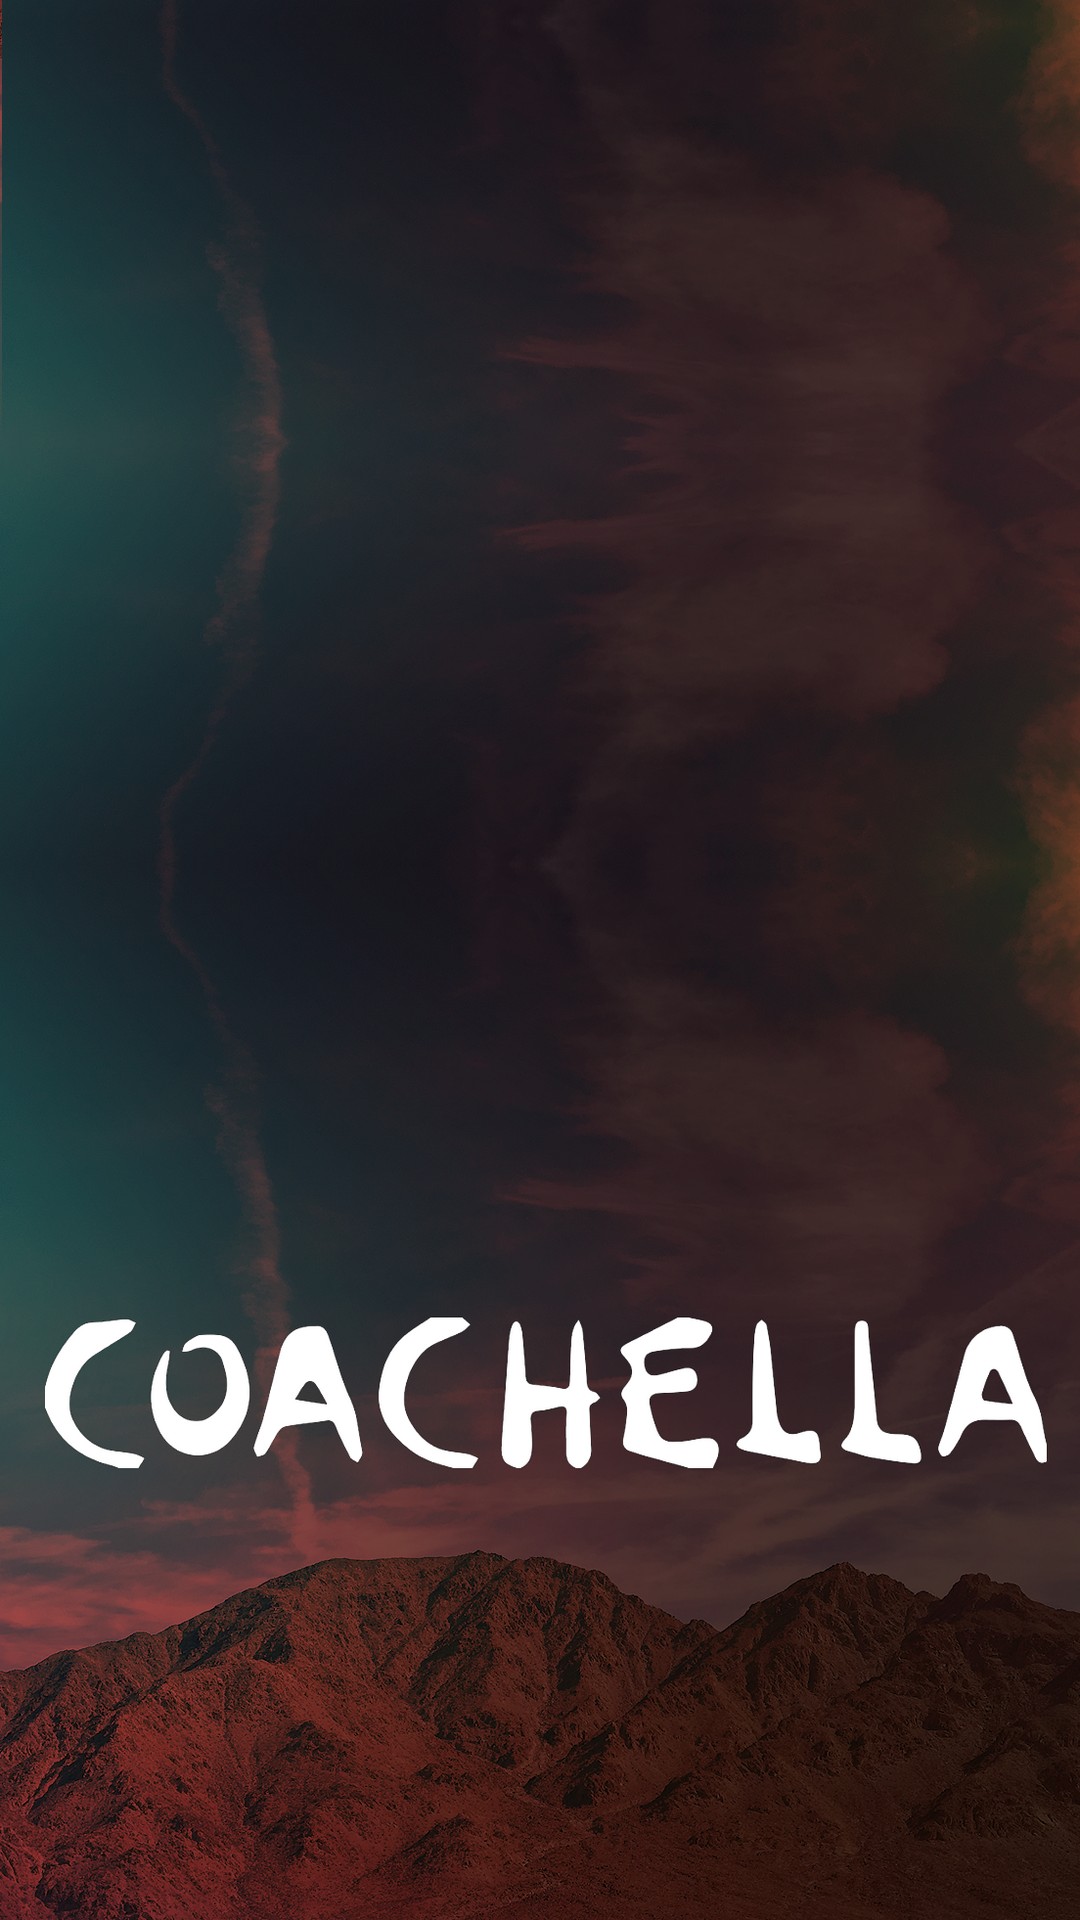 Coachella 2019 Iphone Wallpaper With High-resolution - Coachella 2019 Wallpaper Iphone - HD Wallpaper 